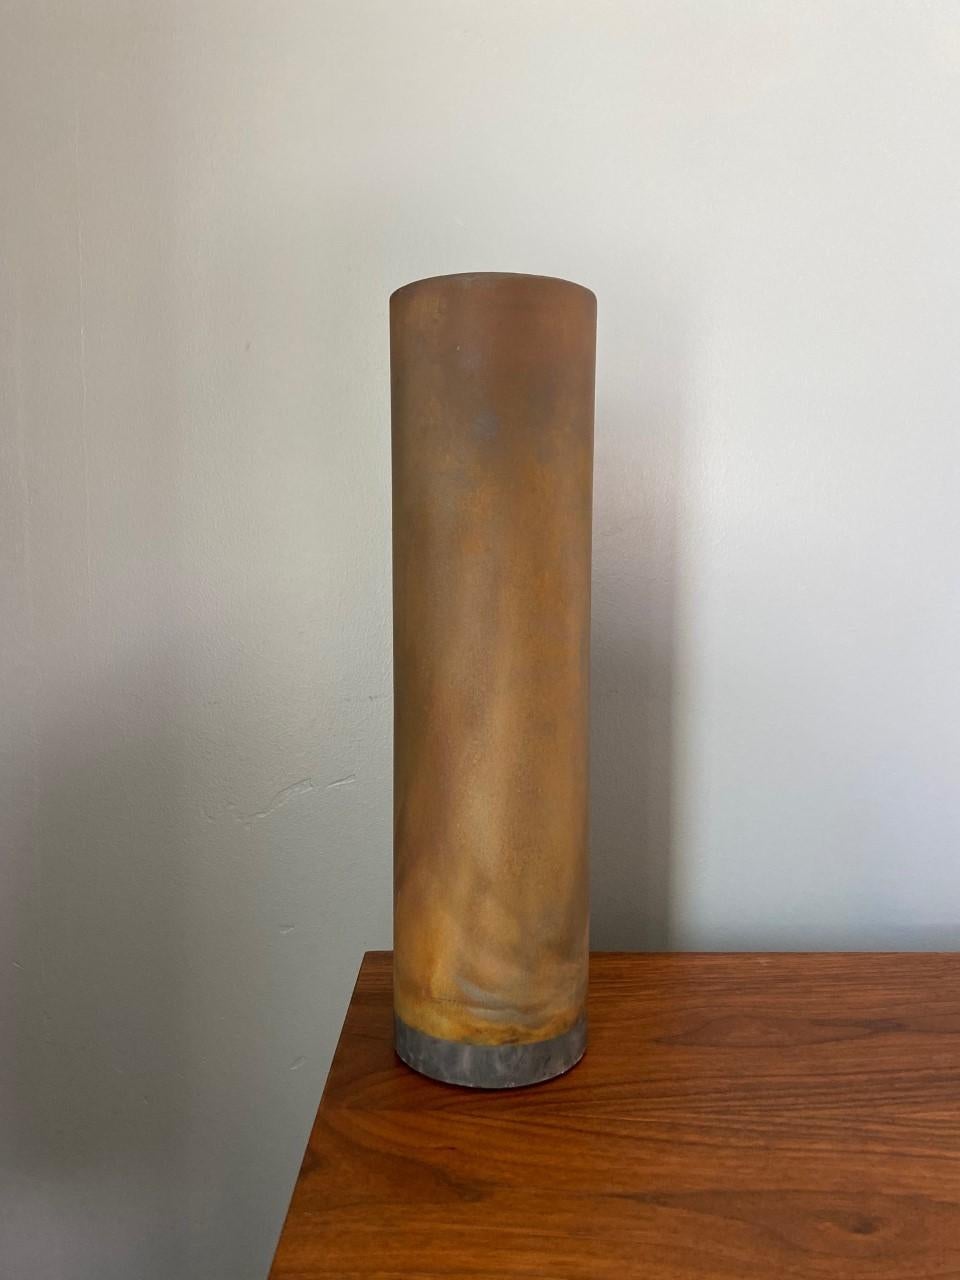 Beautiful vintage and rare ceramic piece. This beautiful vase is column shaped and presents a glaze technique and color that imitates shades of rust. Browns, yellows, gold hues permeate thru the piece. The illusion of metal/rust in the media of